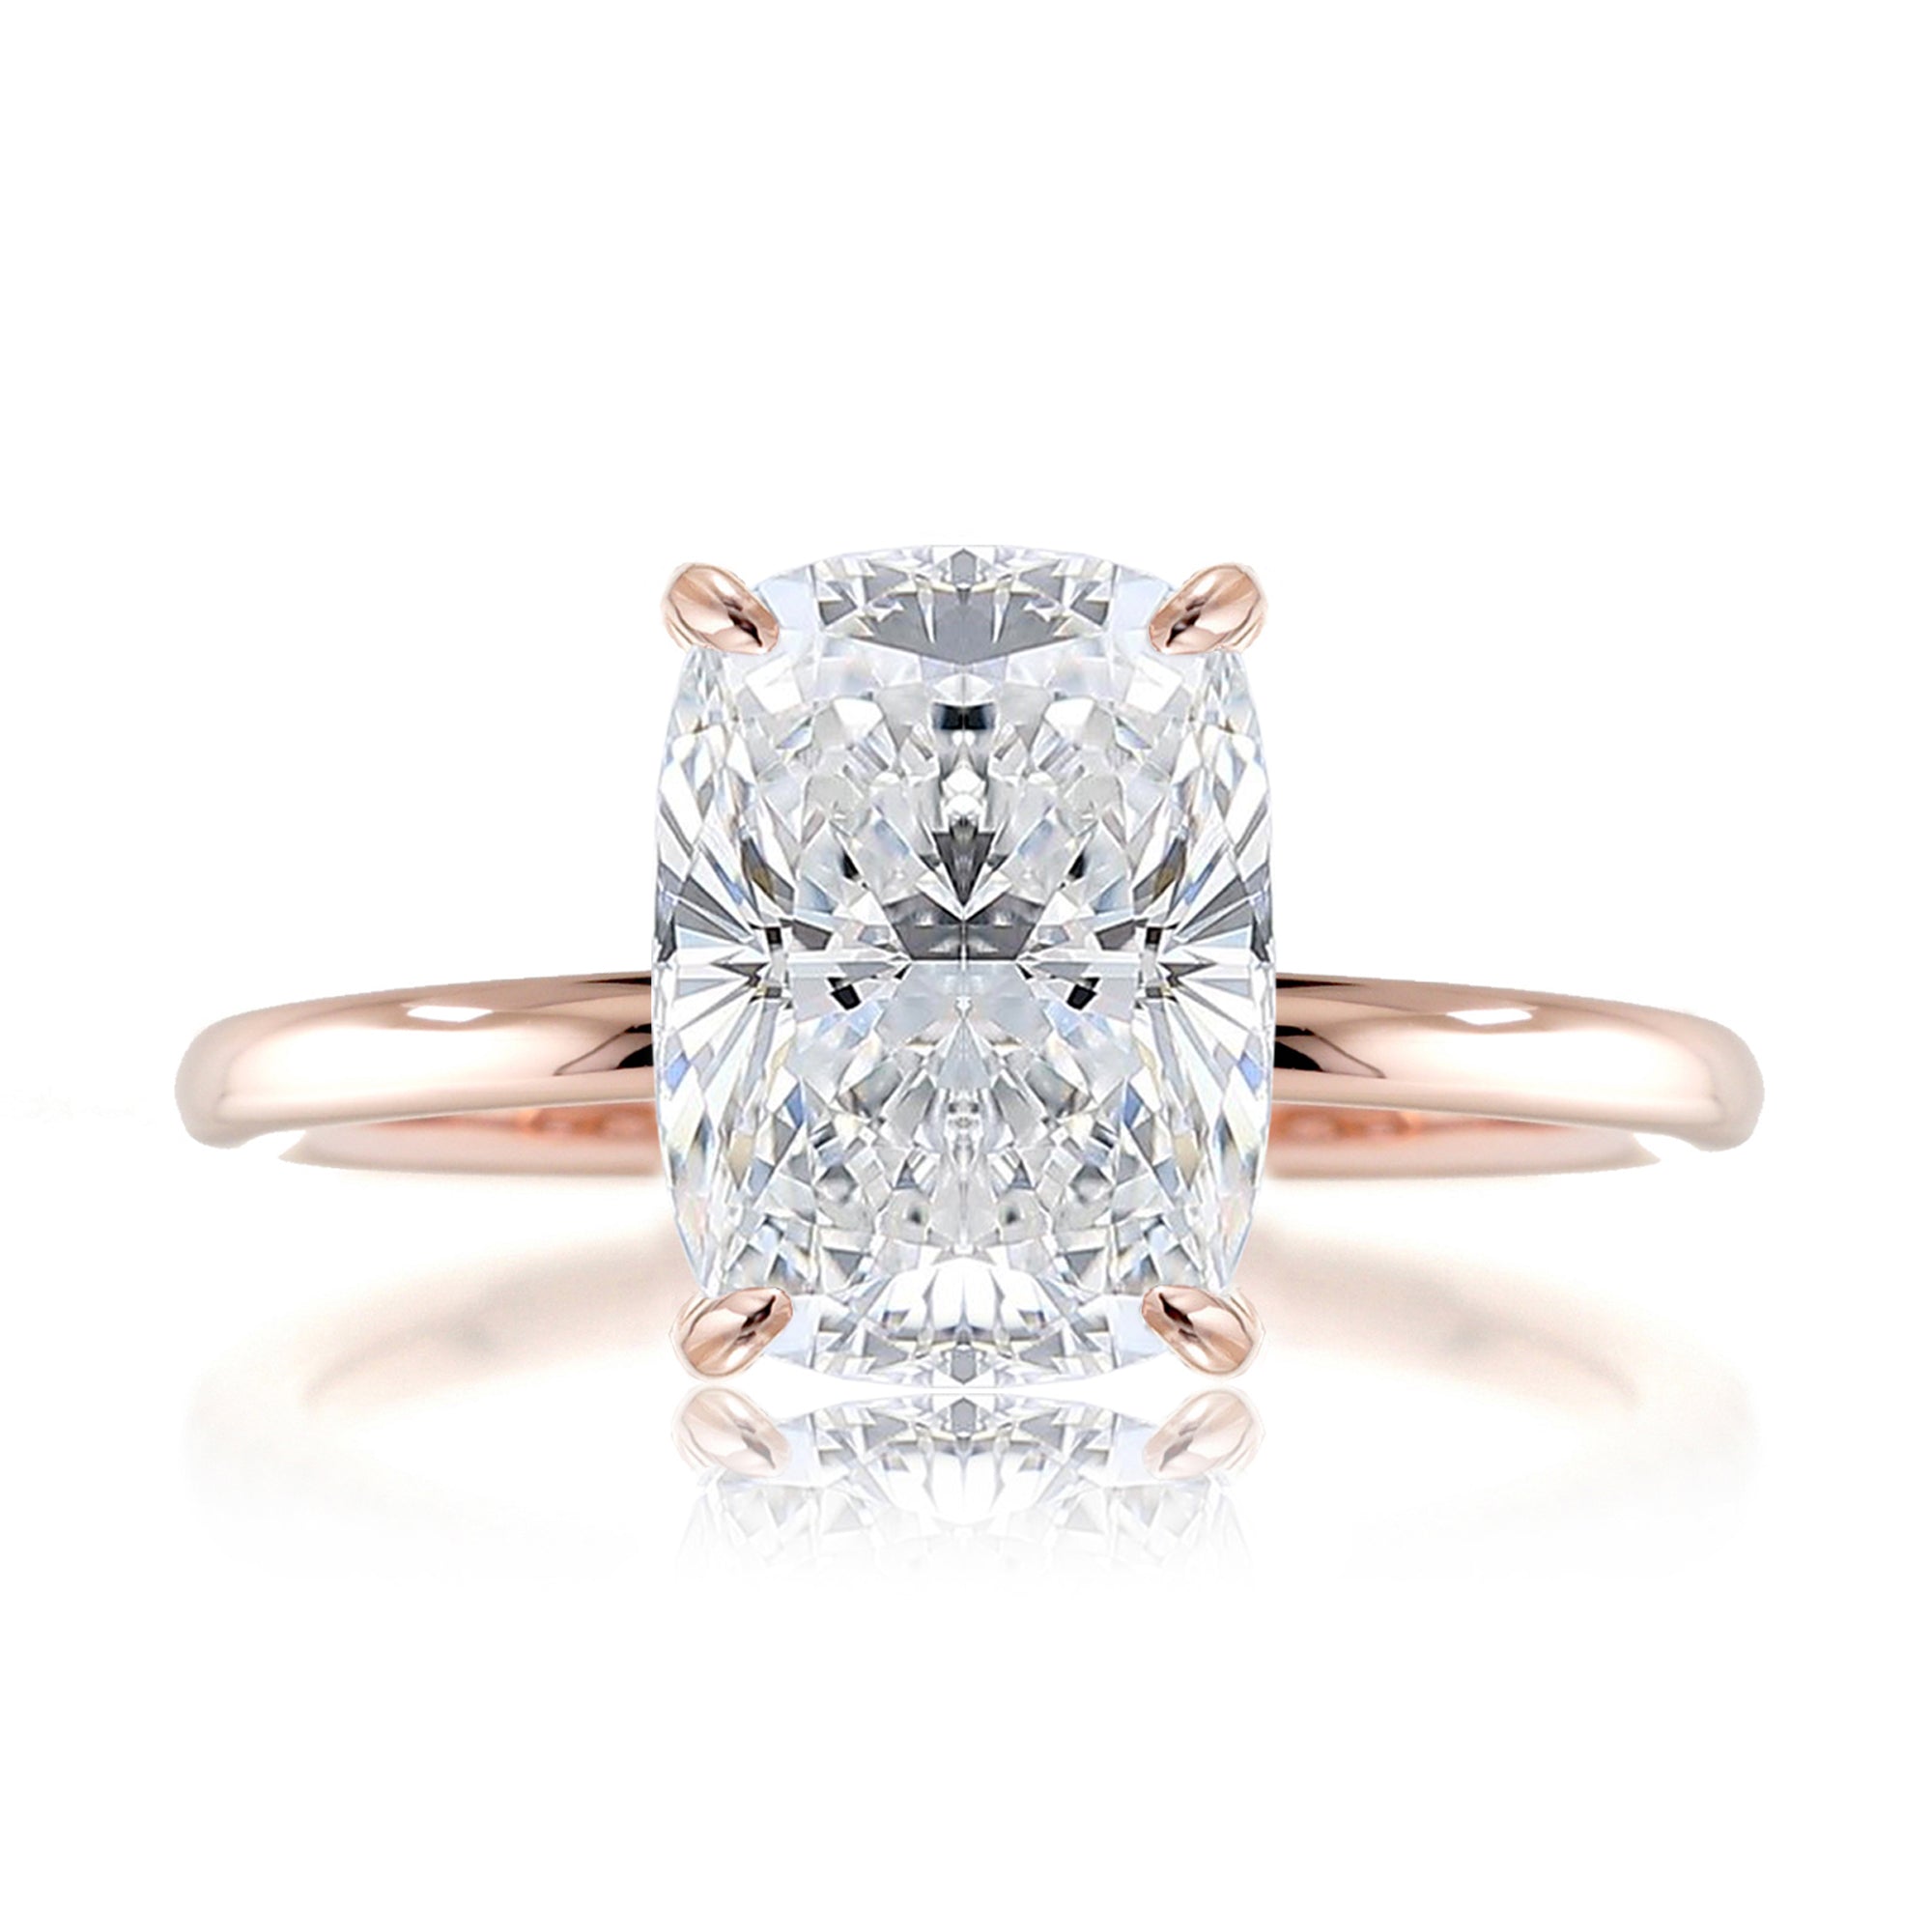 Cushion cut lab-grown diamond engagement ring rose gold - The Ava solid band